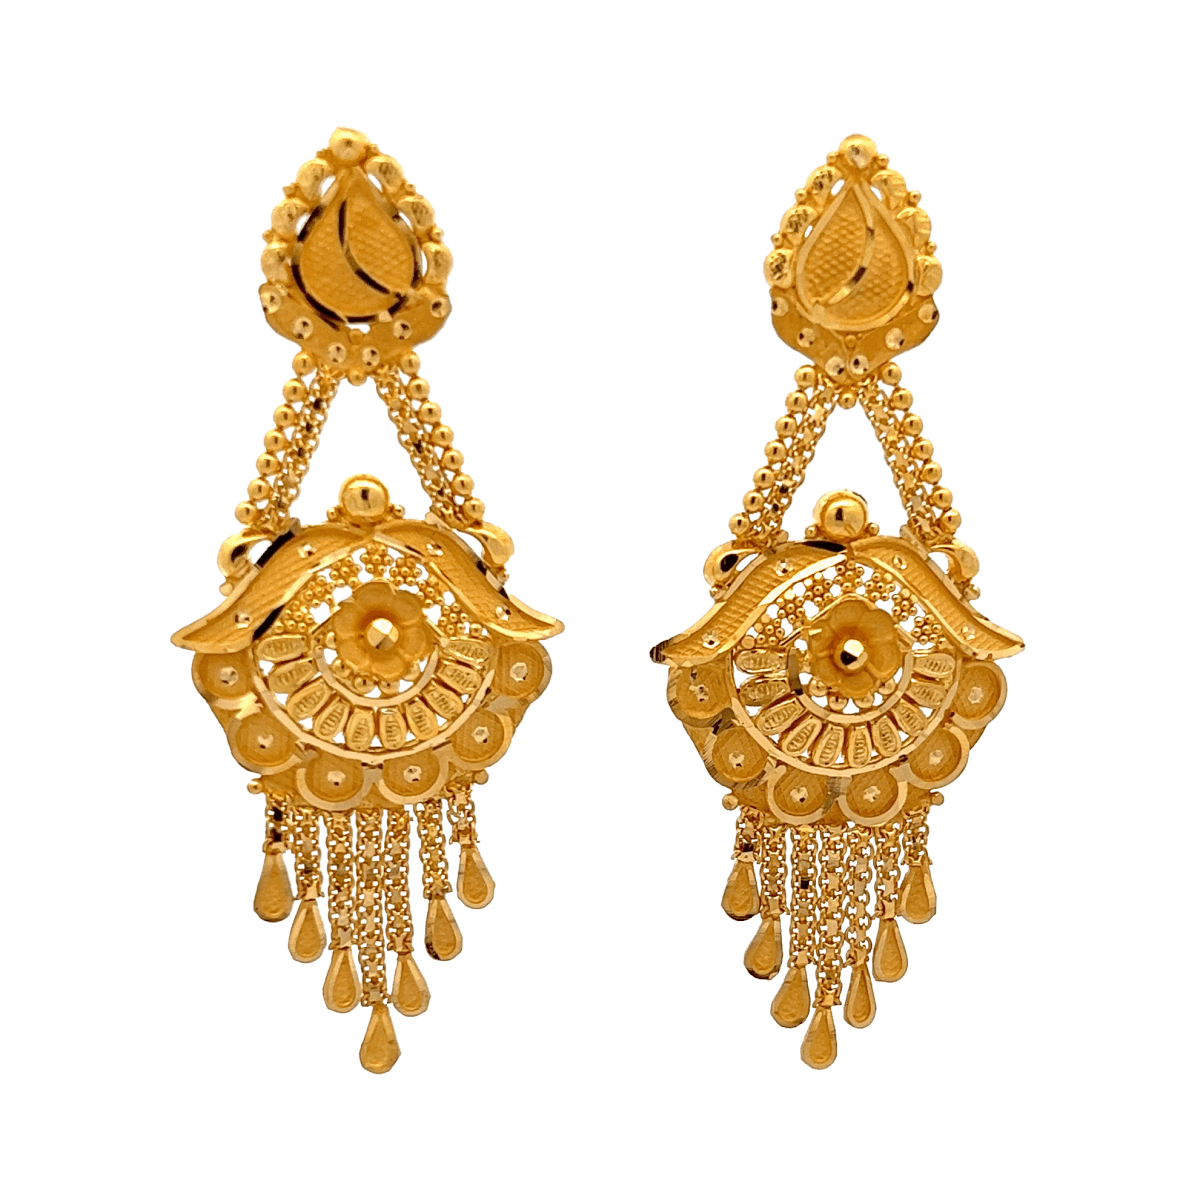 Latest Gold Small Earring ||Studs|| Designs Huge Collection - YouTube |  Small earrings studs, Stud earrings, Small earrings